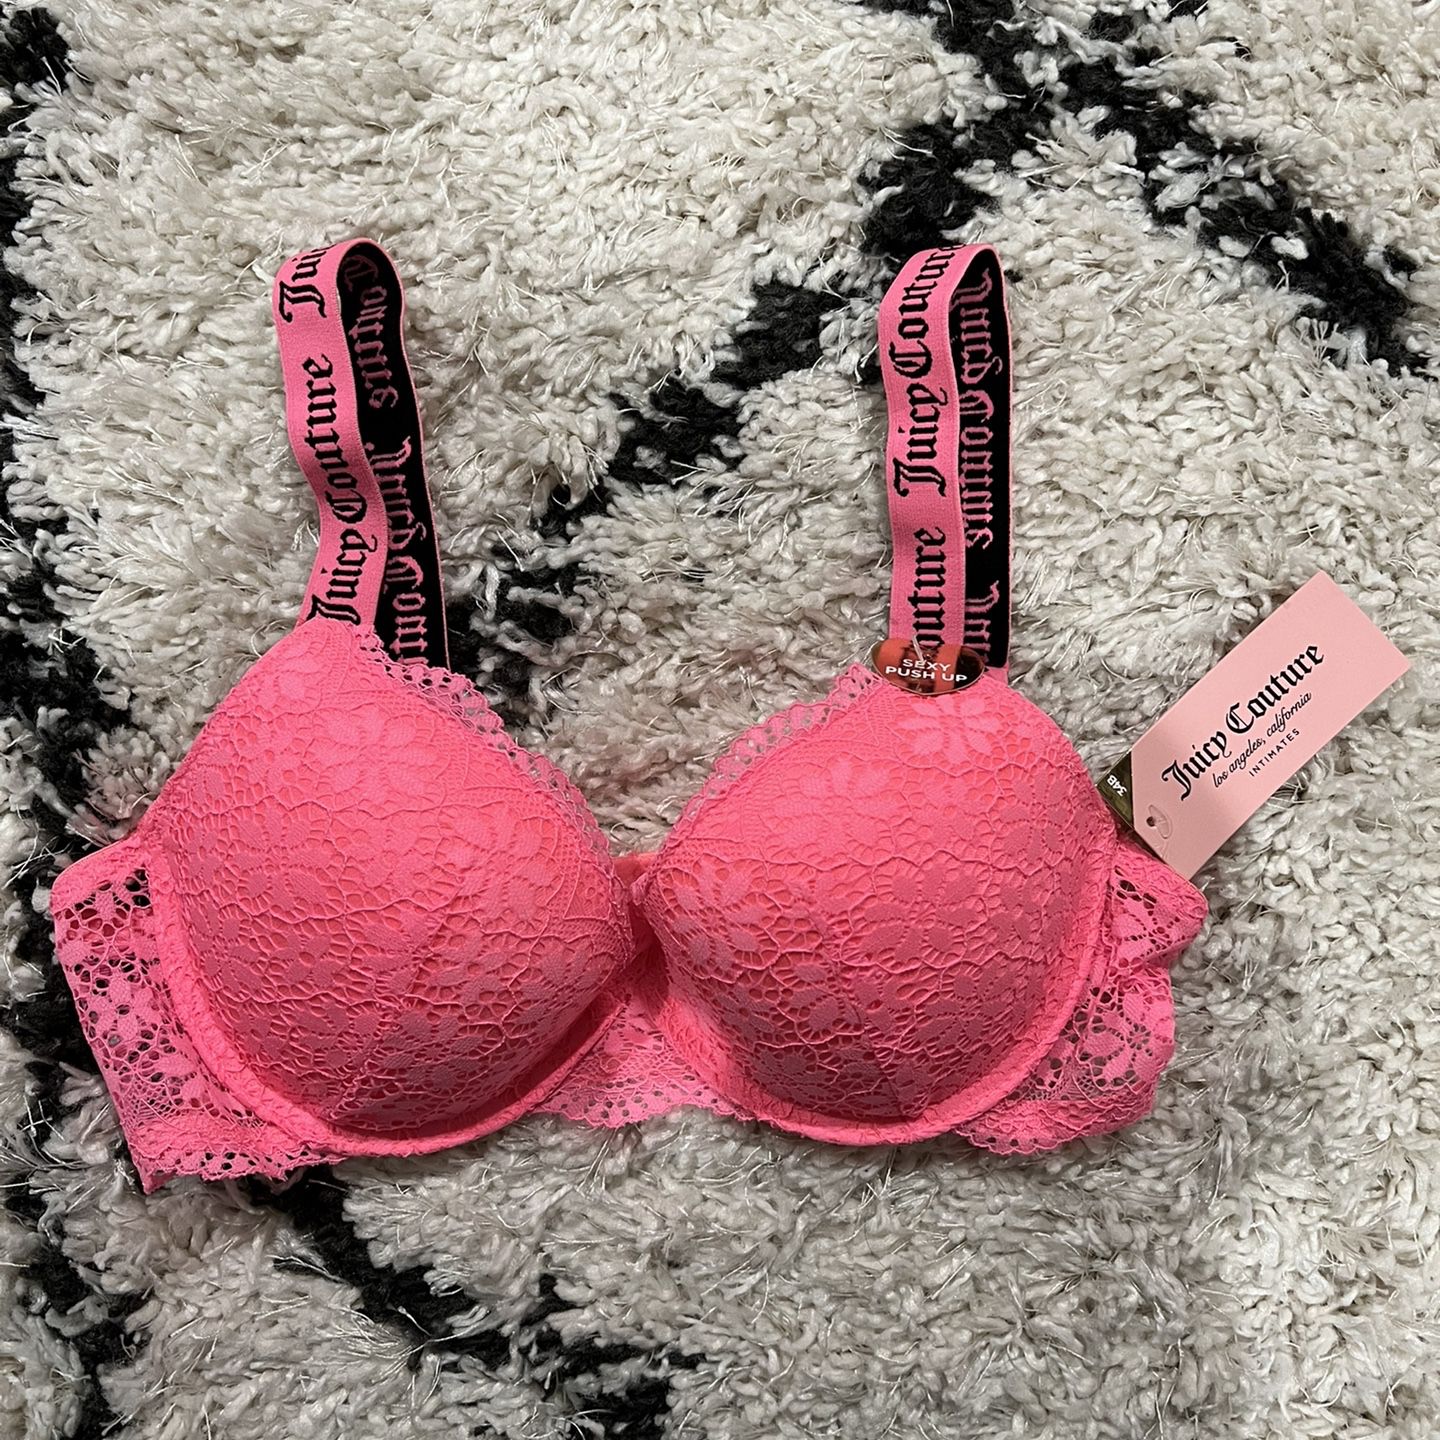 Juicy Couture Push Up Neon Pink Lace Bra 34B for Sale in Fairfax, CA -  OfferUp